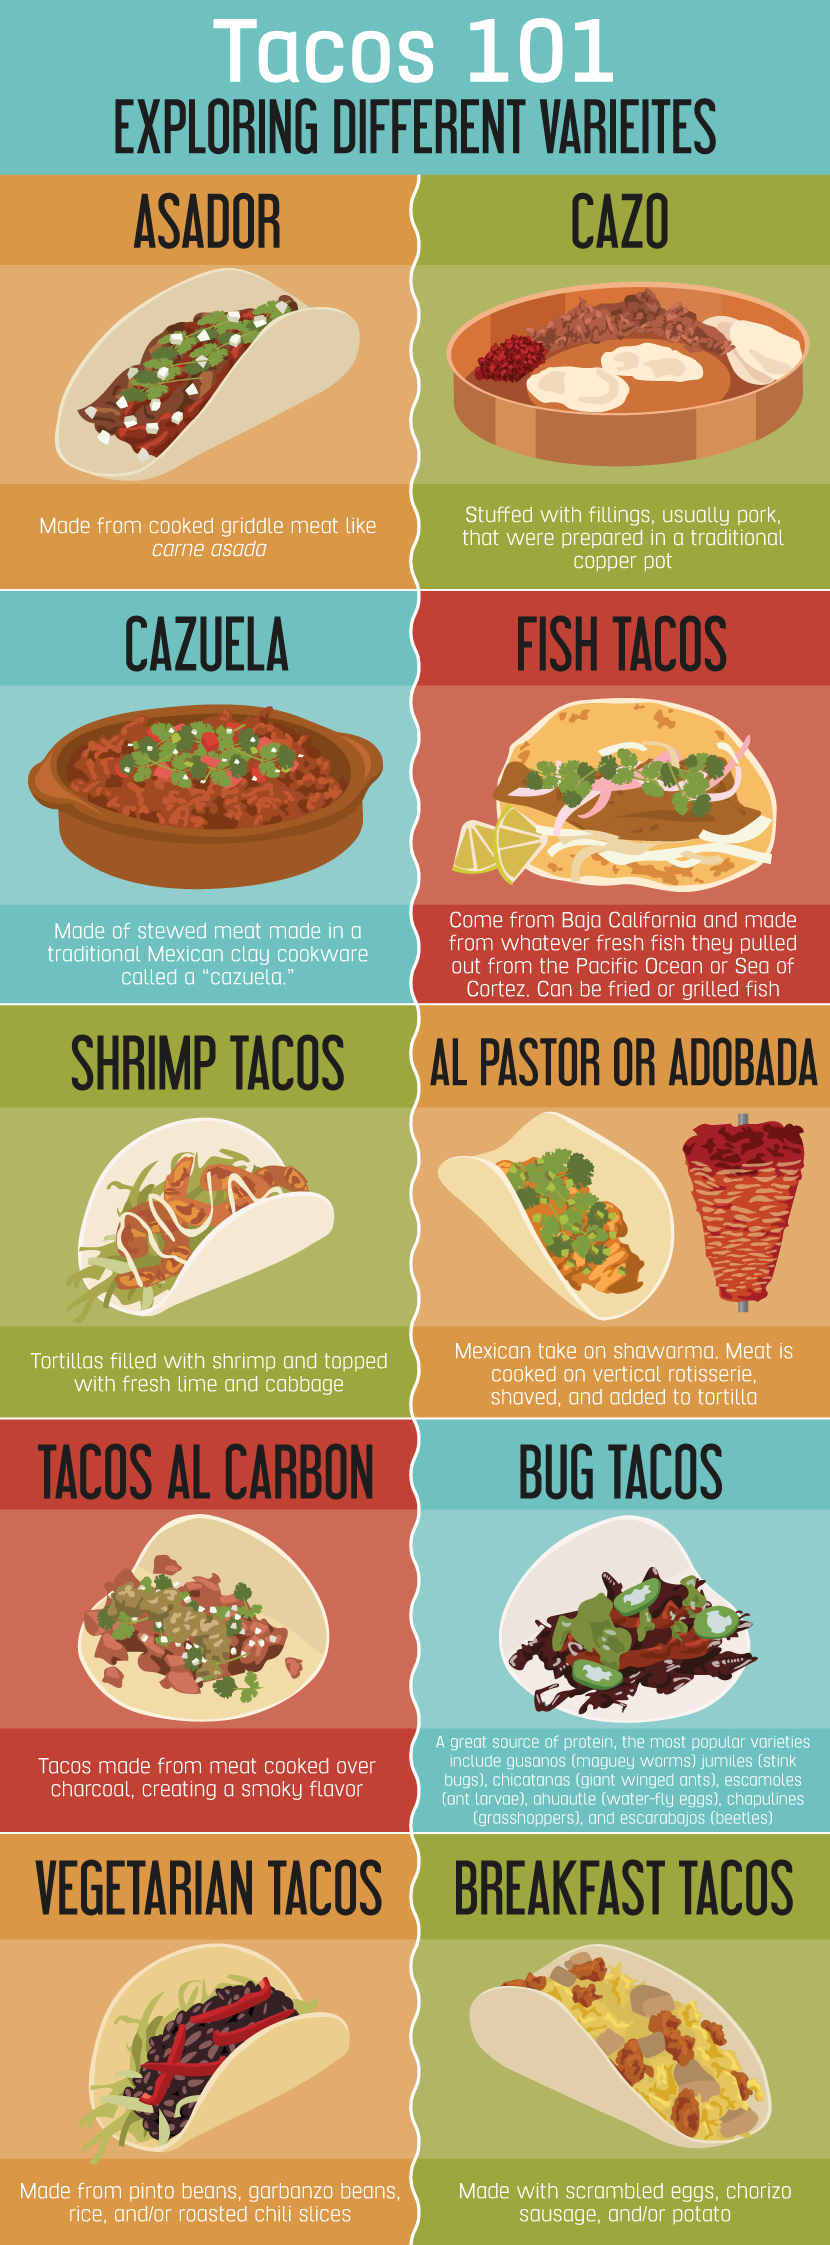 Everything You Wanted to Know About Authentic Mexican Food | Food & Wine